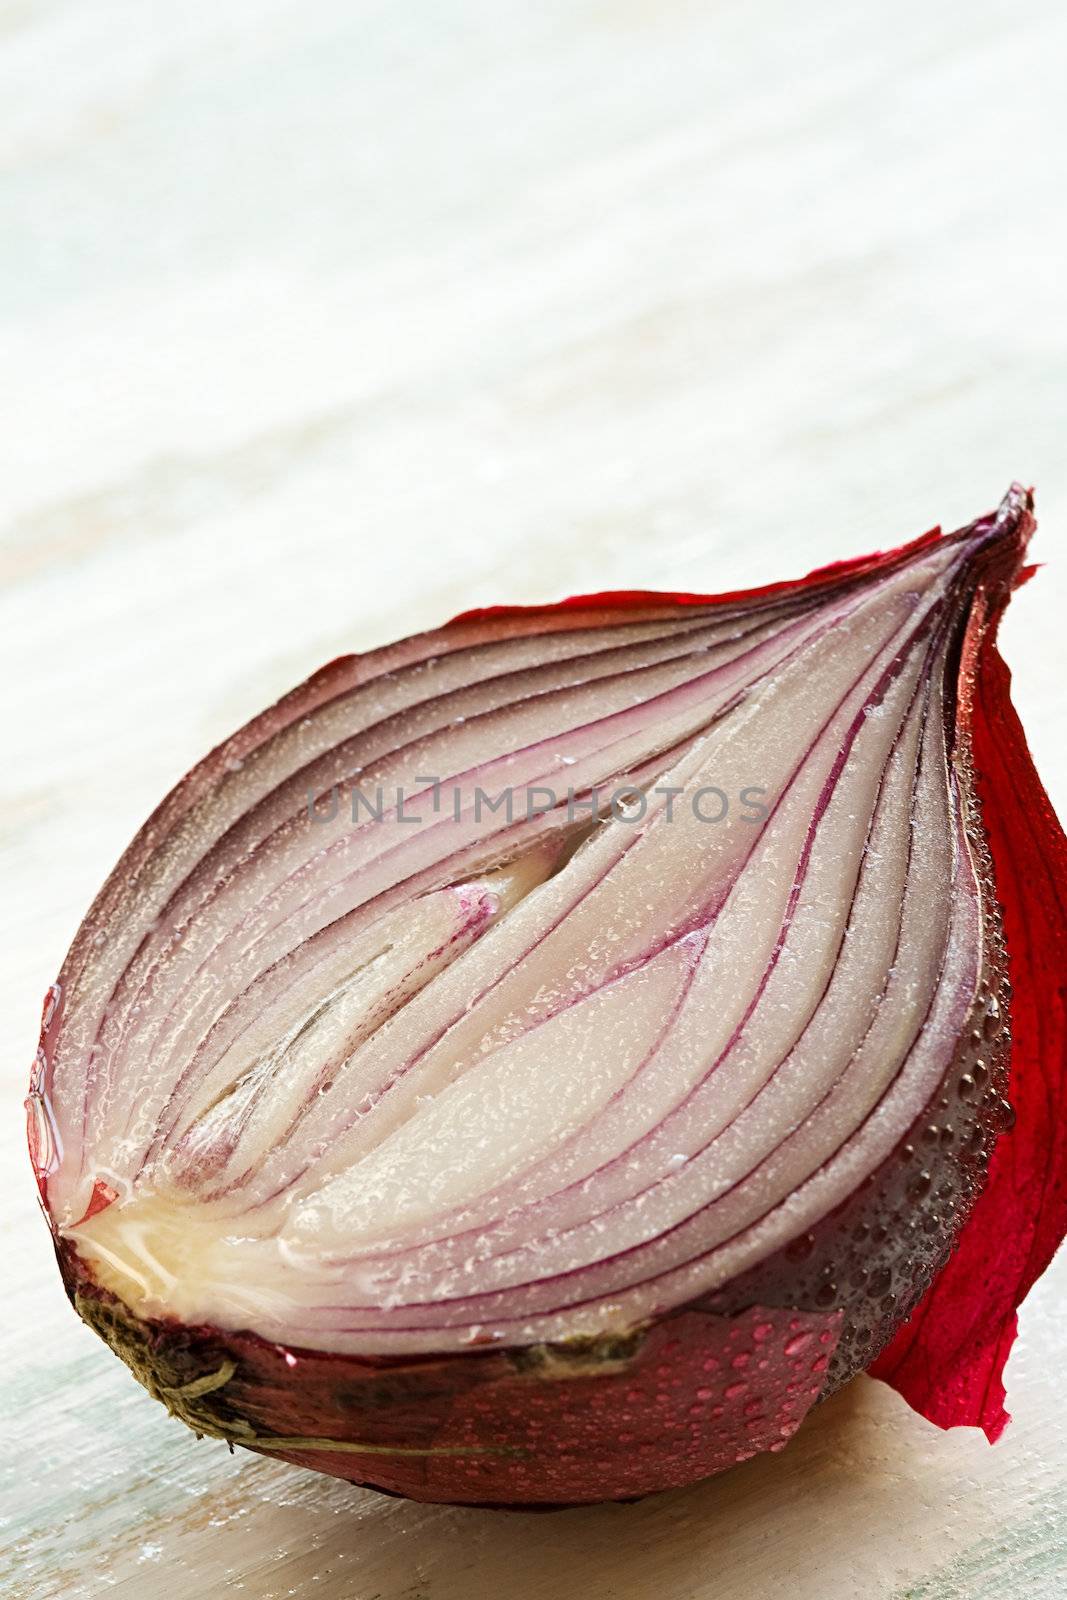 Red onion by Gravicapa